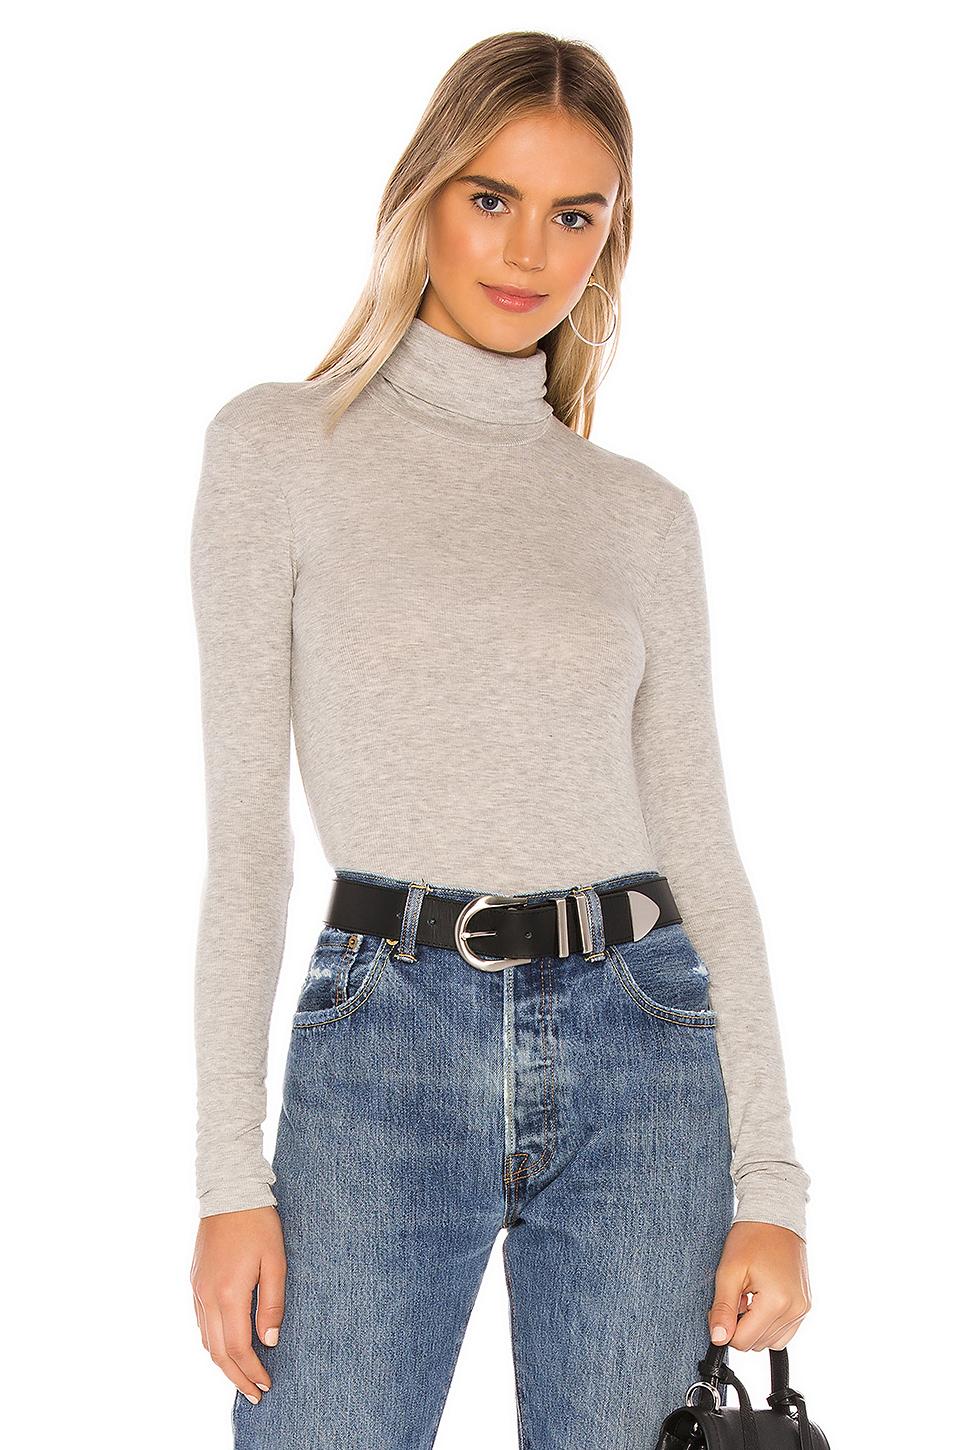 ATM Synthetic Micro Modal Rib Turtleneck Top in Heather Grey (Gray ...